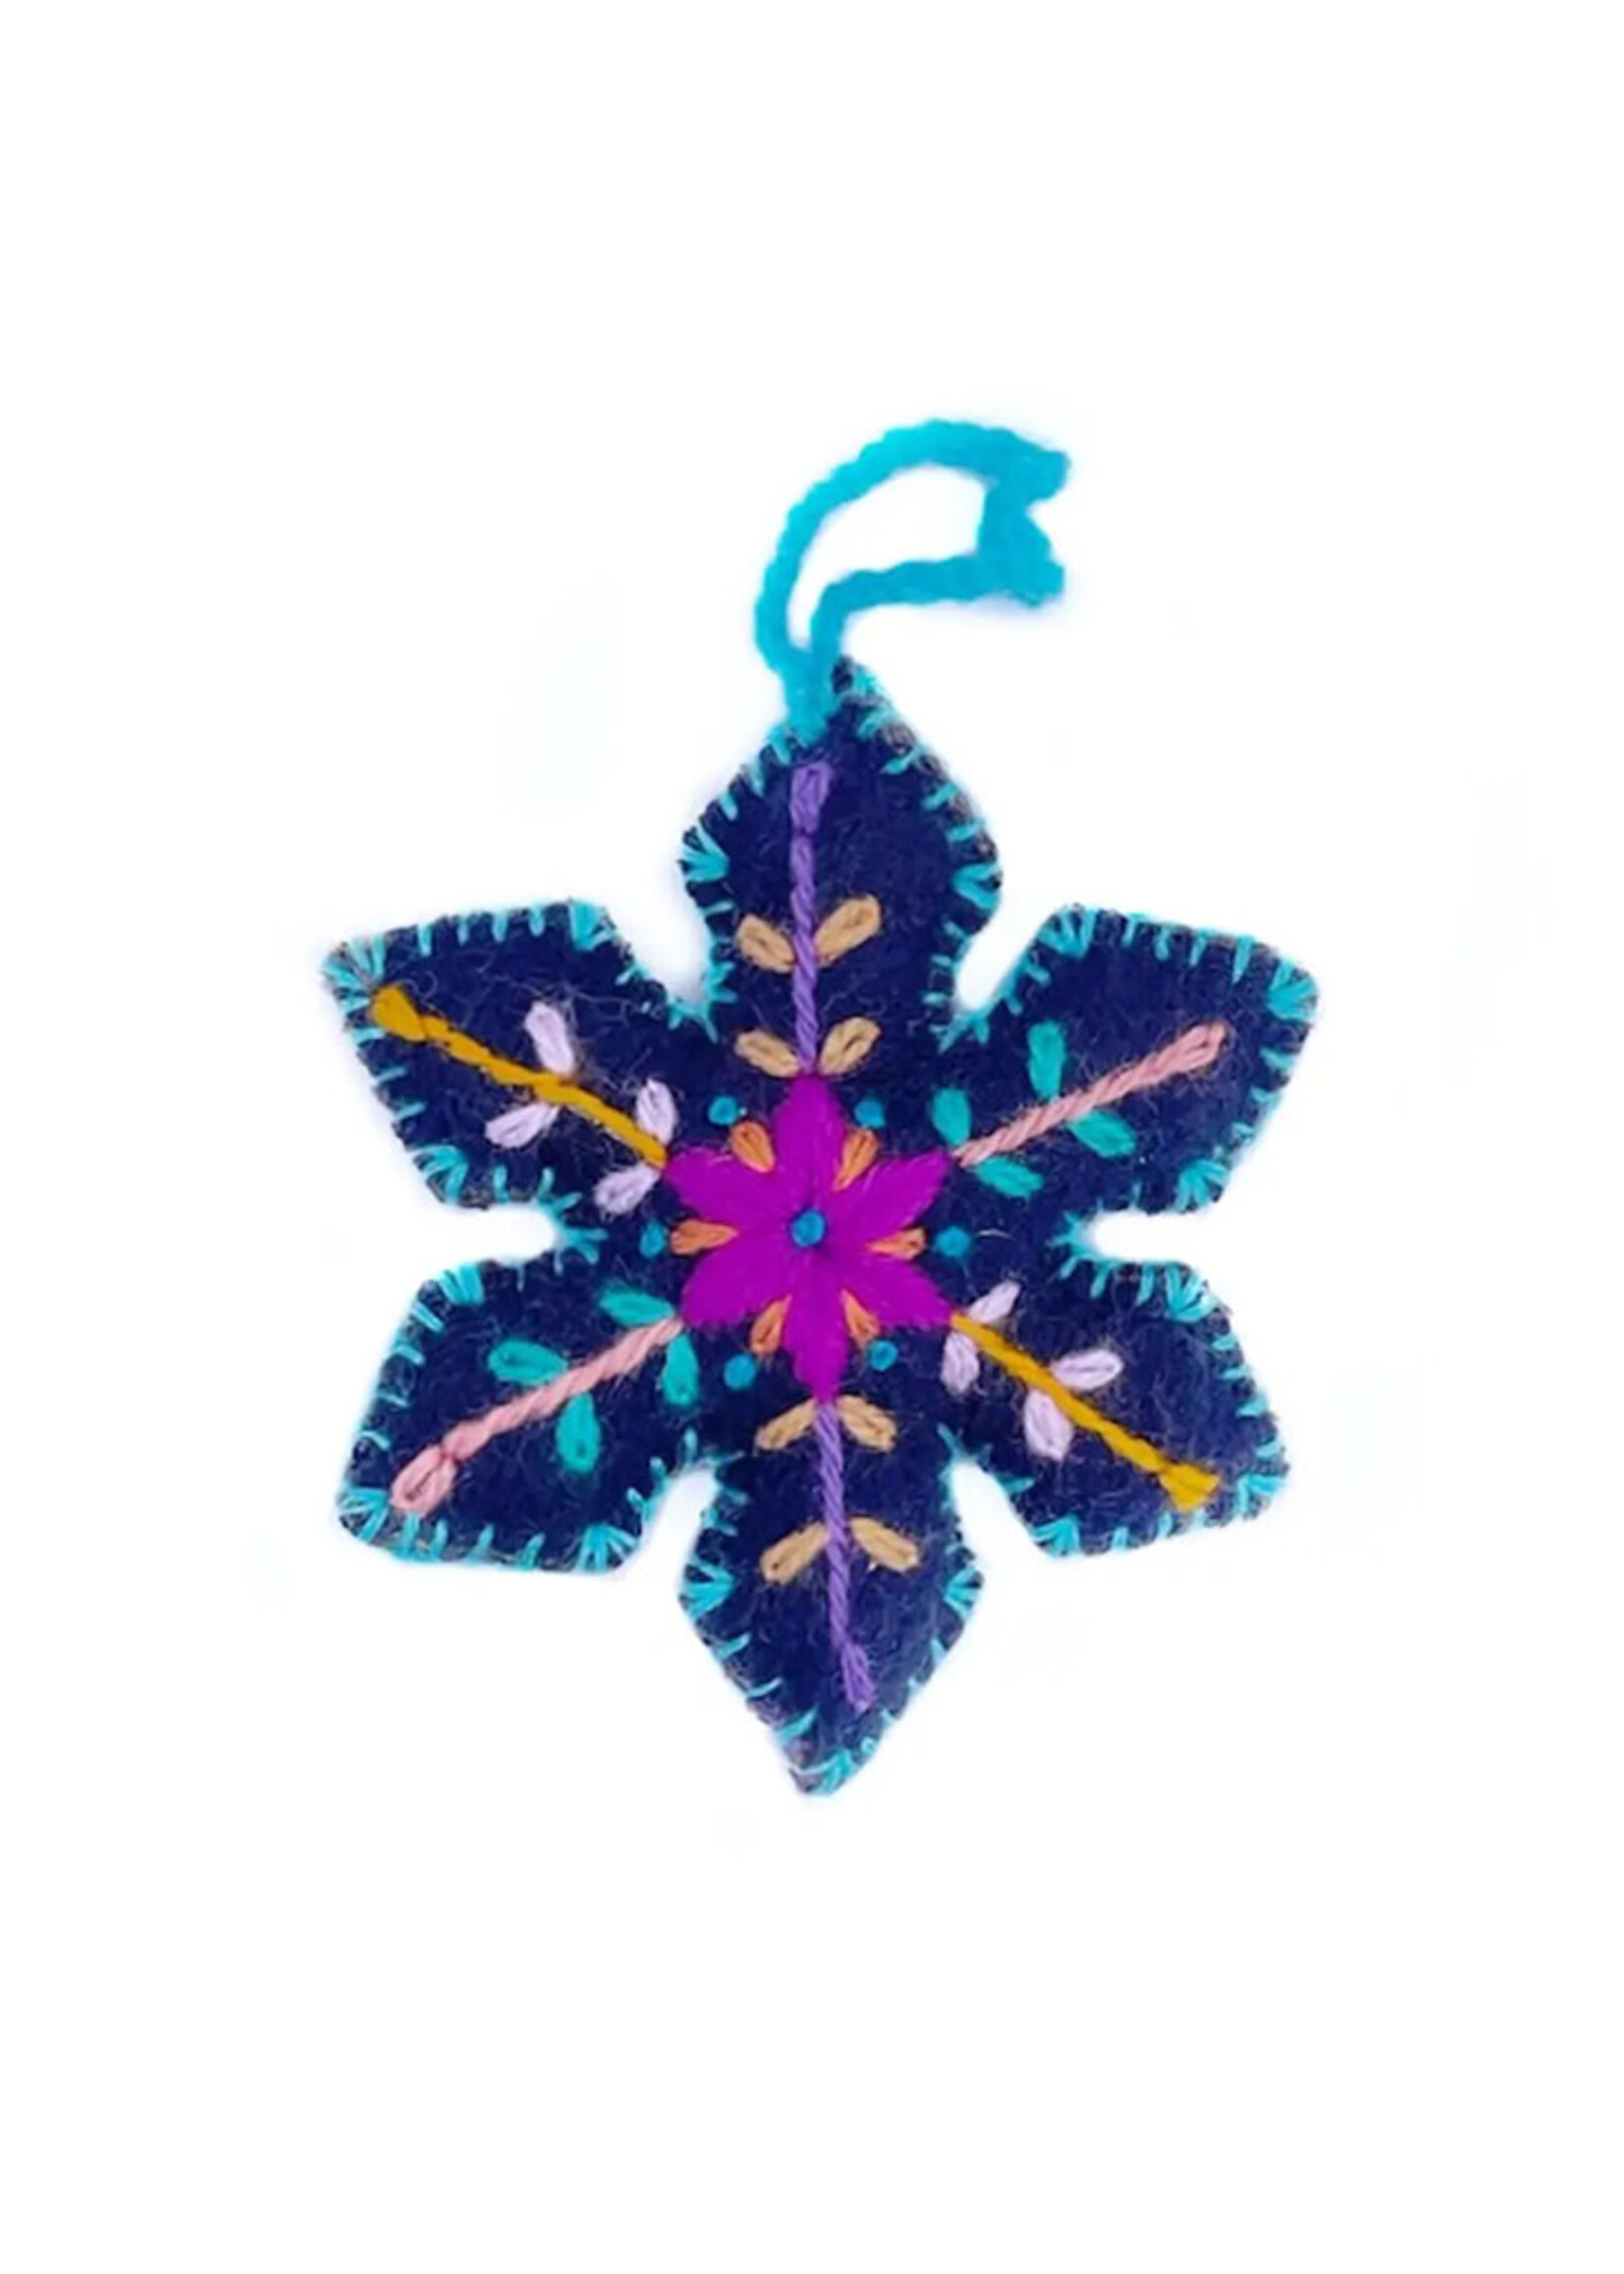 Ornaments 4 Orphans Embroidered Snowflake Ornament - Navy